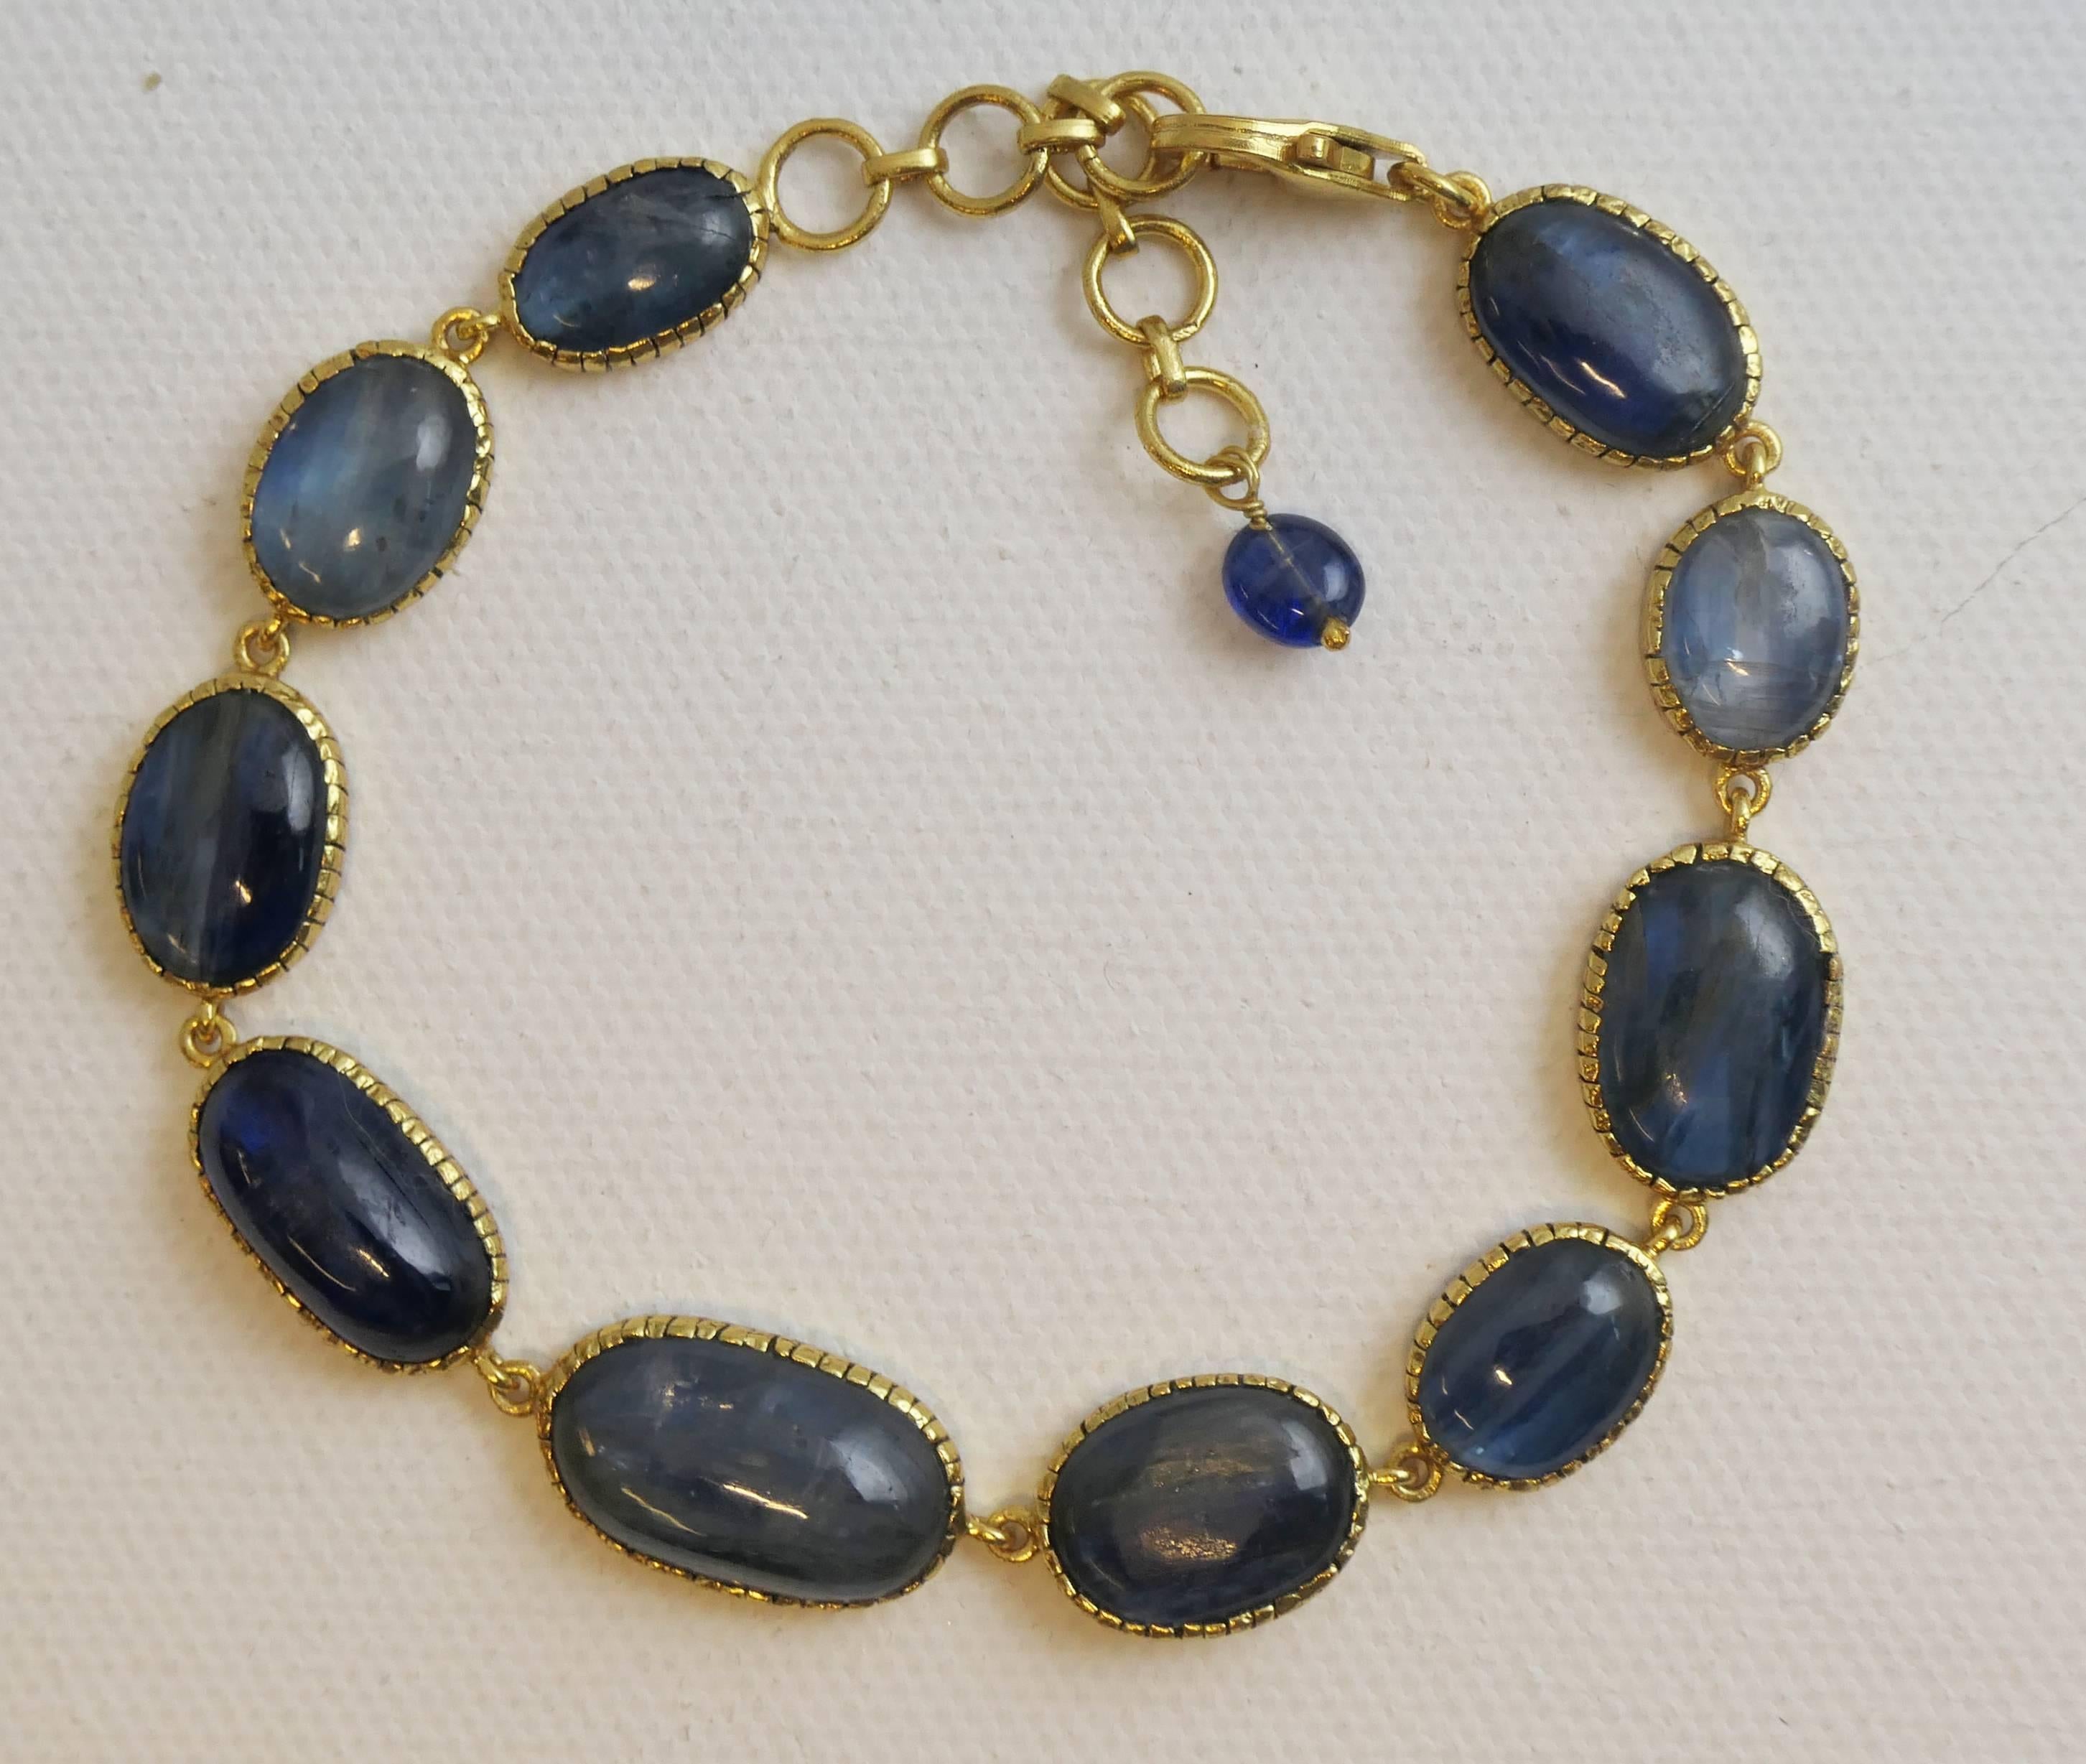 This single strand Kyanite bracelet is 7.5 inches long with an additional 1.5 inch of extension chain and it has a hook clasp. The cabochon kyanite are of varying shapes and sizes, ranging from 10 to 18mm in diameter.